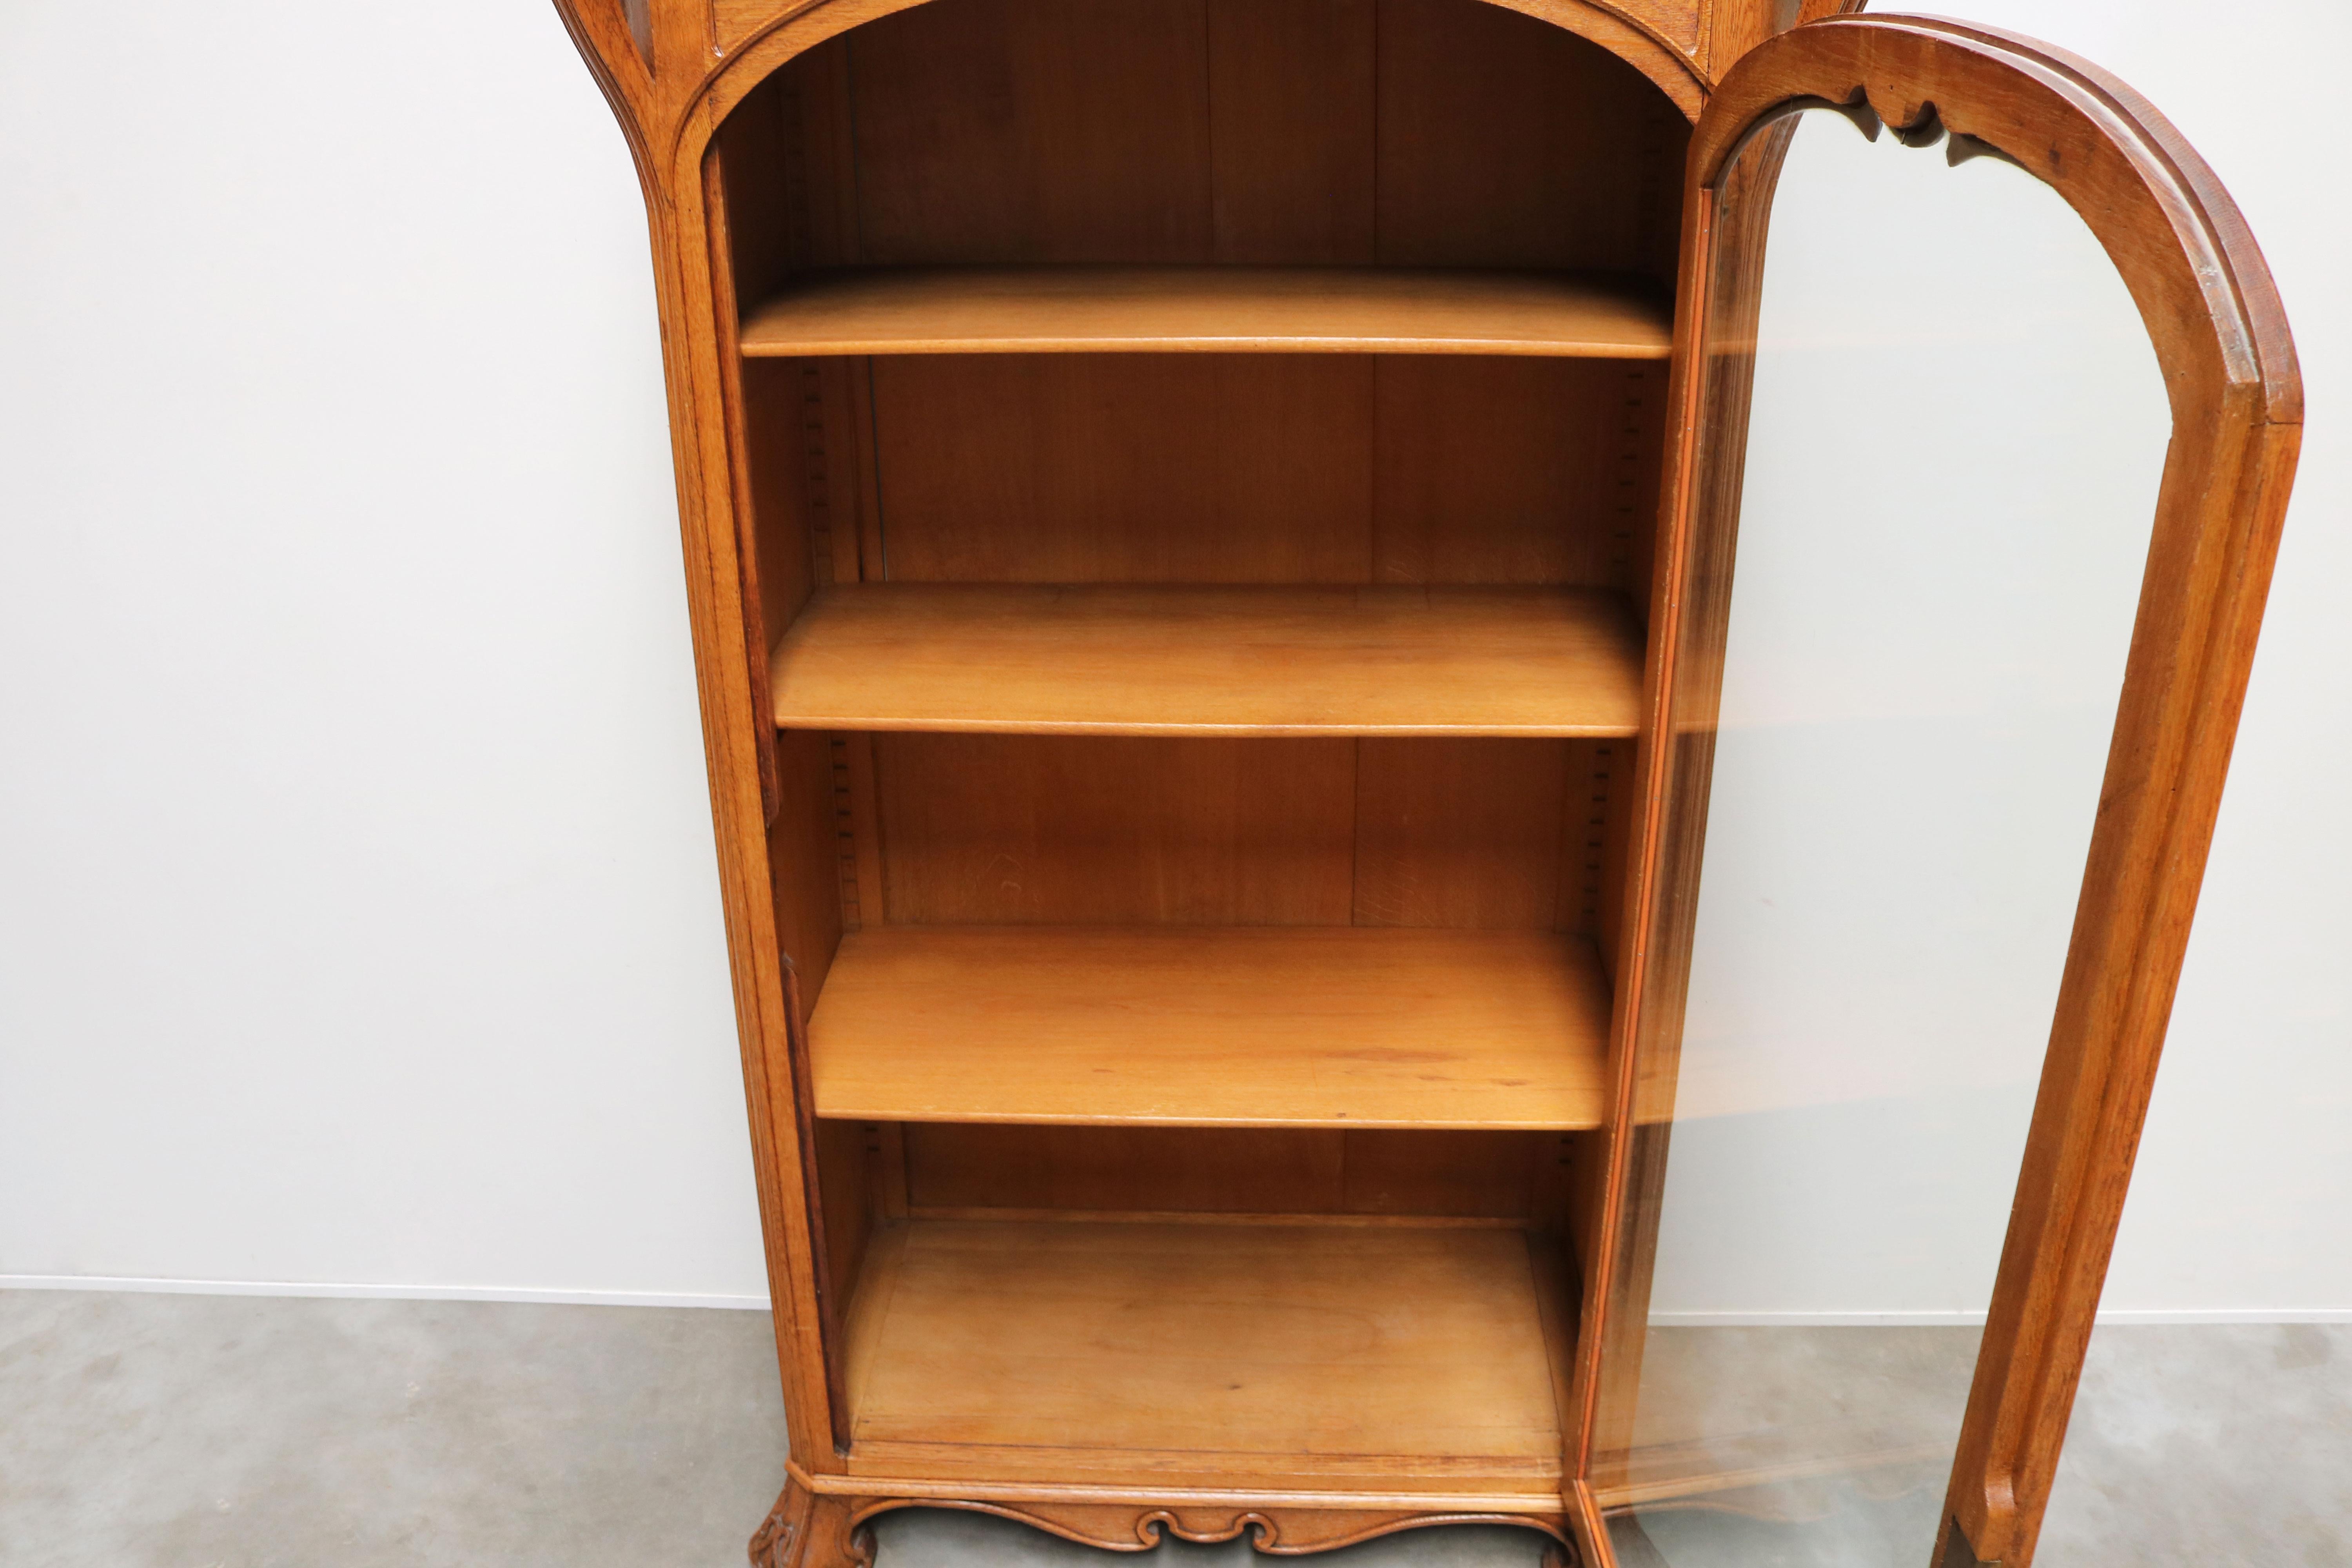 Antique French Art Nouveau Cabinet by Henri Sauvage 1900 Oak Display Cabinet For Sale 7